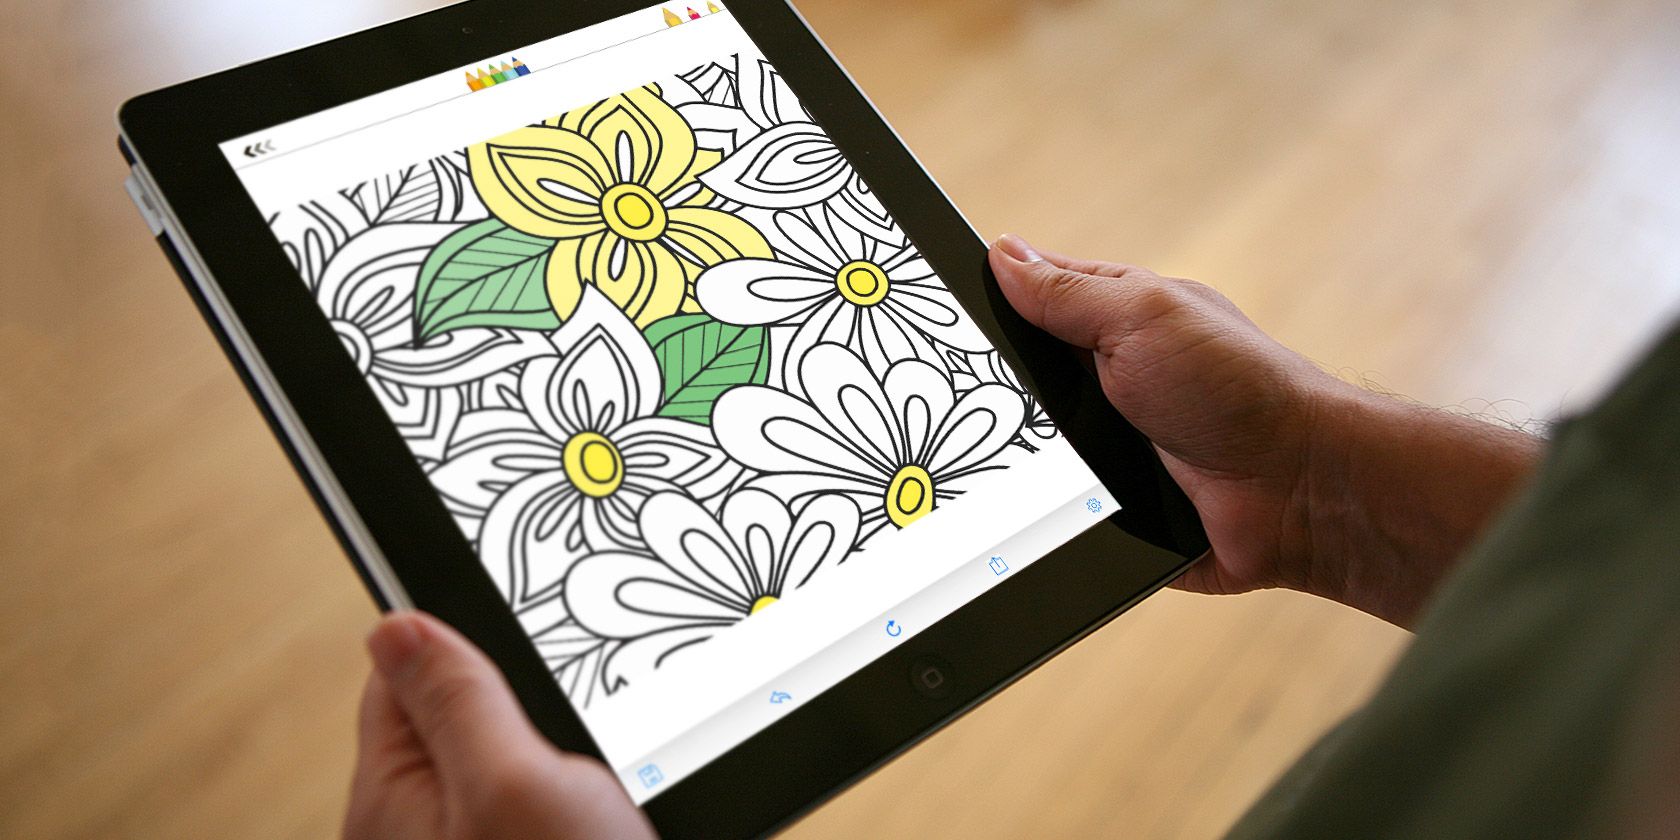 Download iPad Coloring Book Apps for Adults to Help You Relax & Unwind